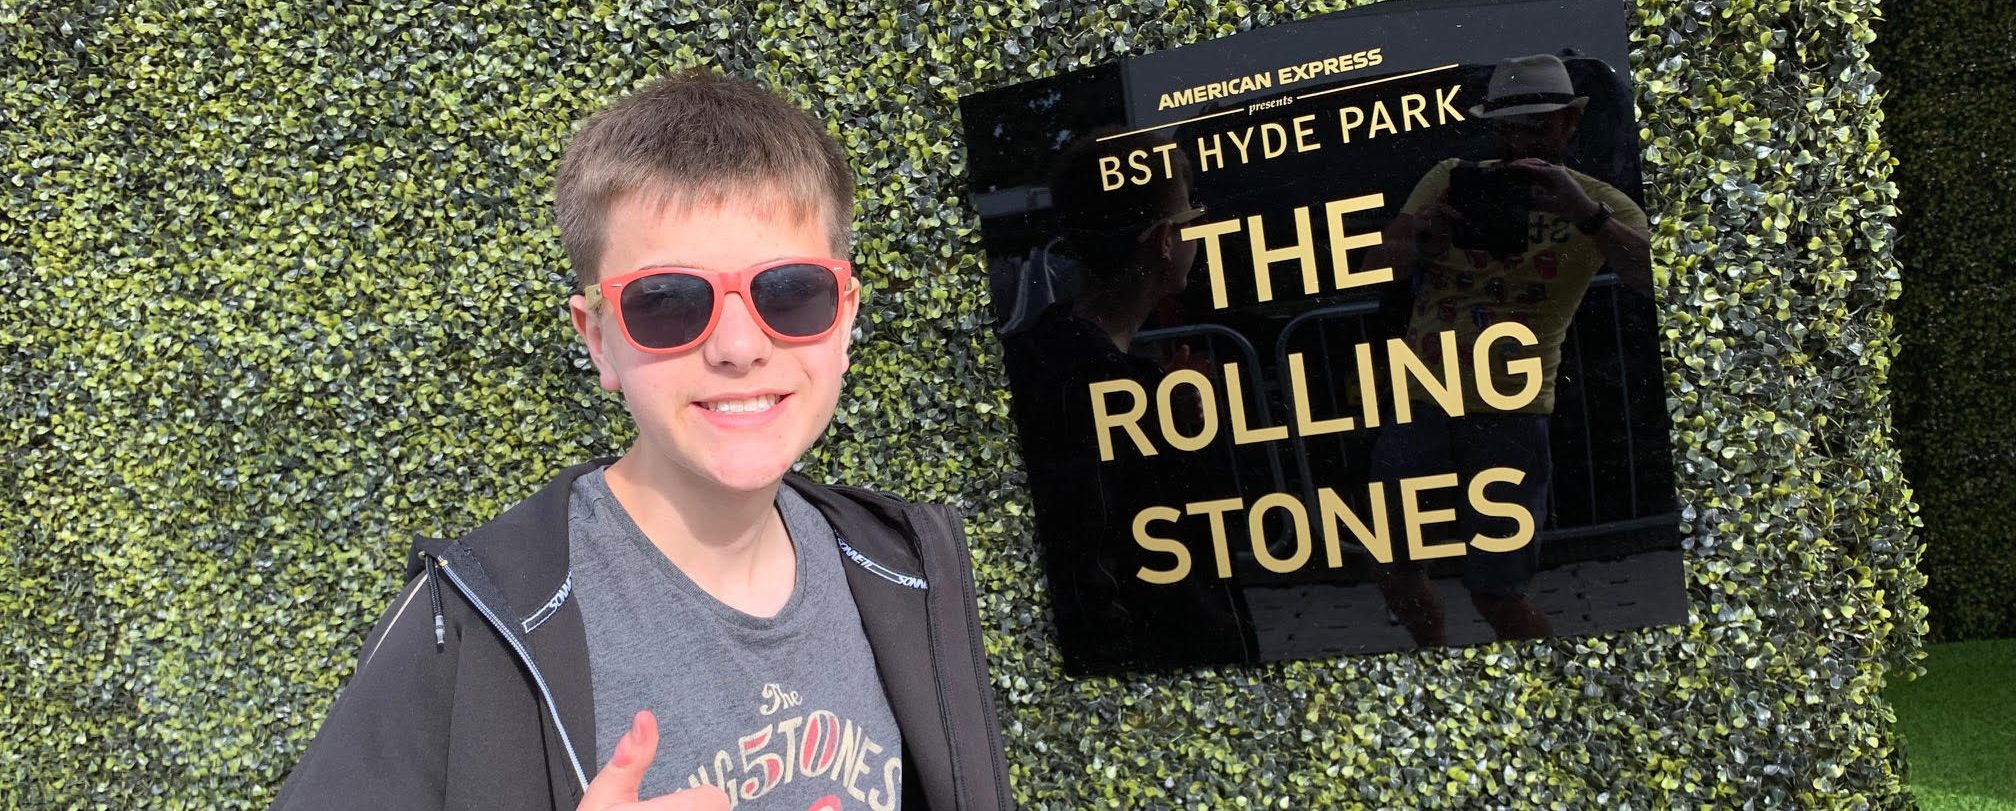 American Express presents BST Hyde Park 2022 – Con at The Rolling Stones